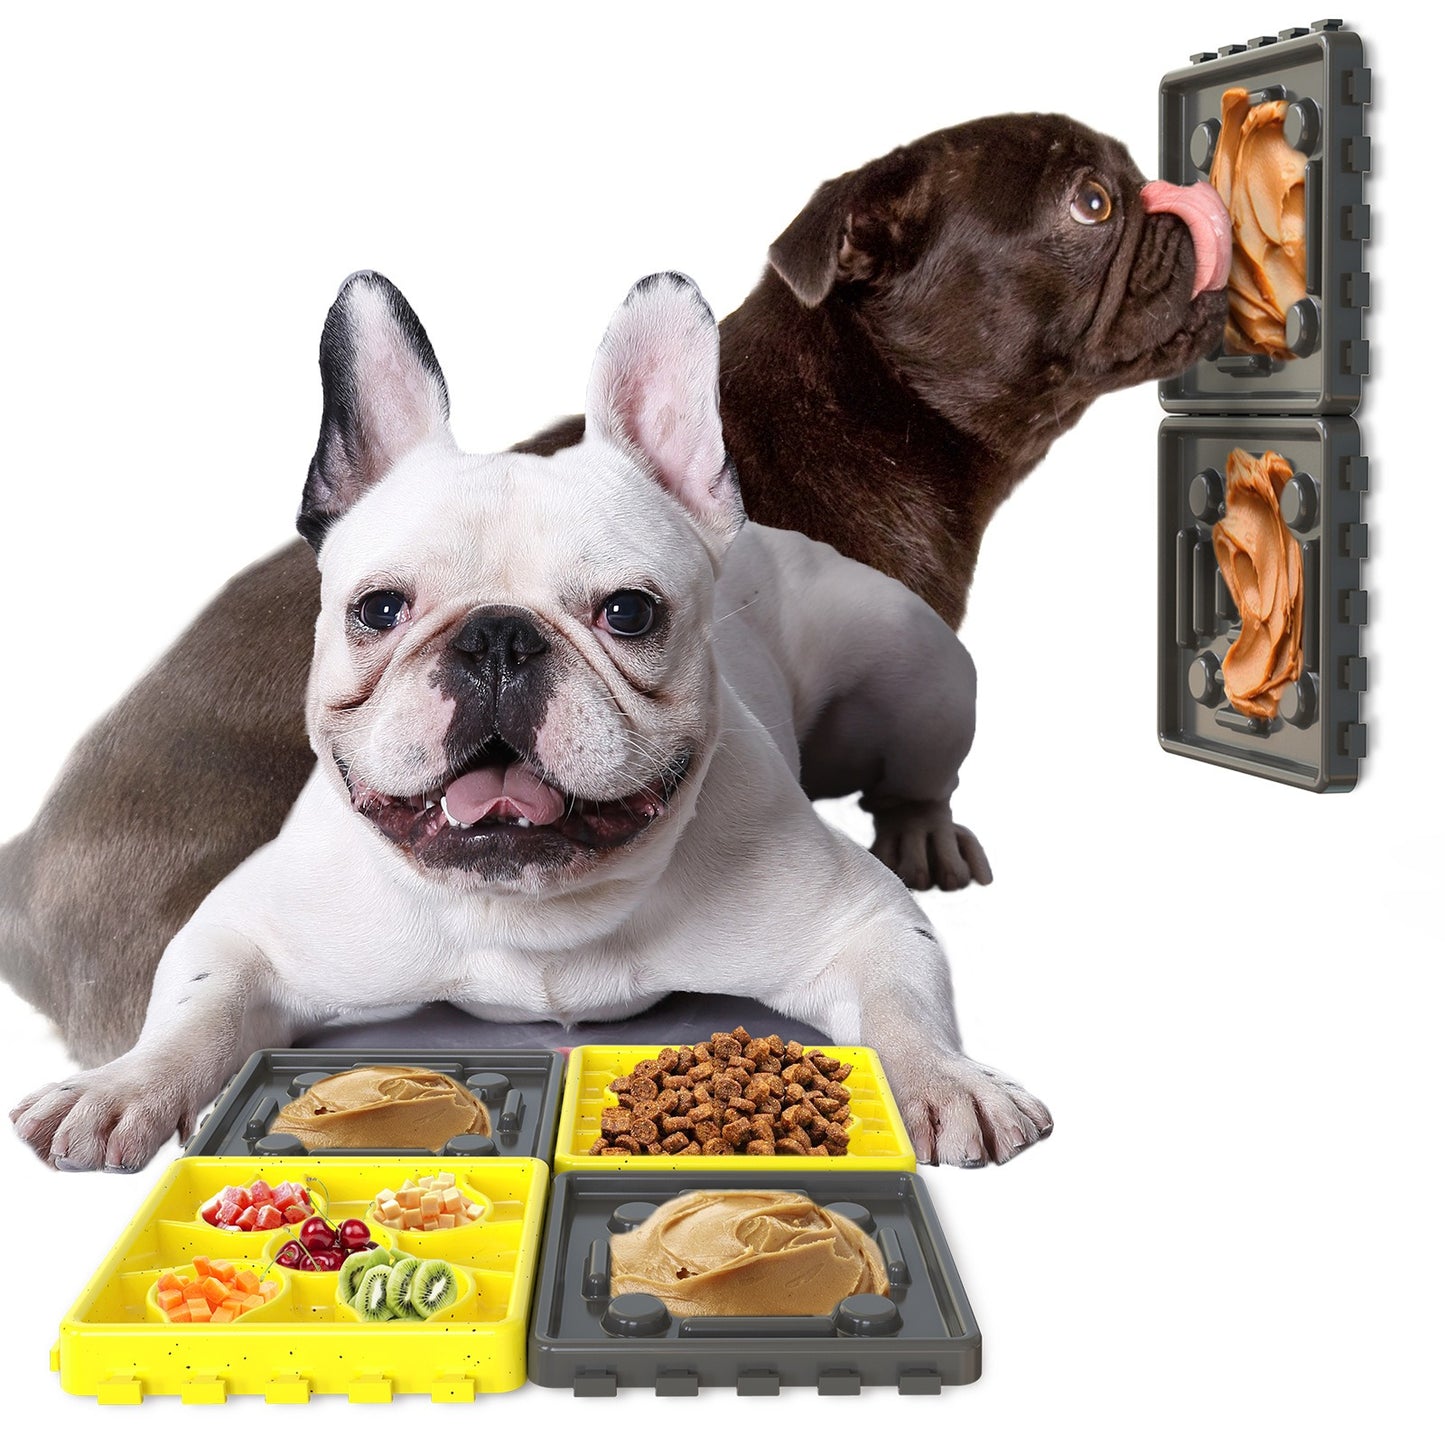 Hot Selling Pet Products: Dog Choke Proof Slow Food Bowl, Slow Food Bowl, Licking Combination Plate, Slow Treater